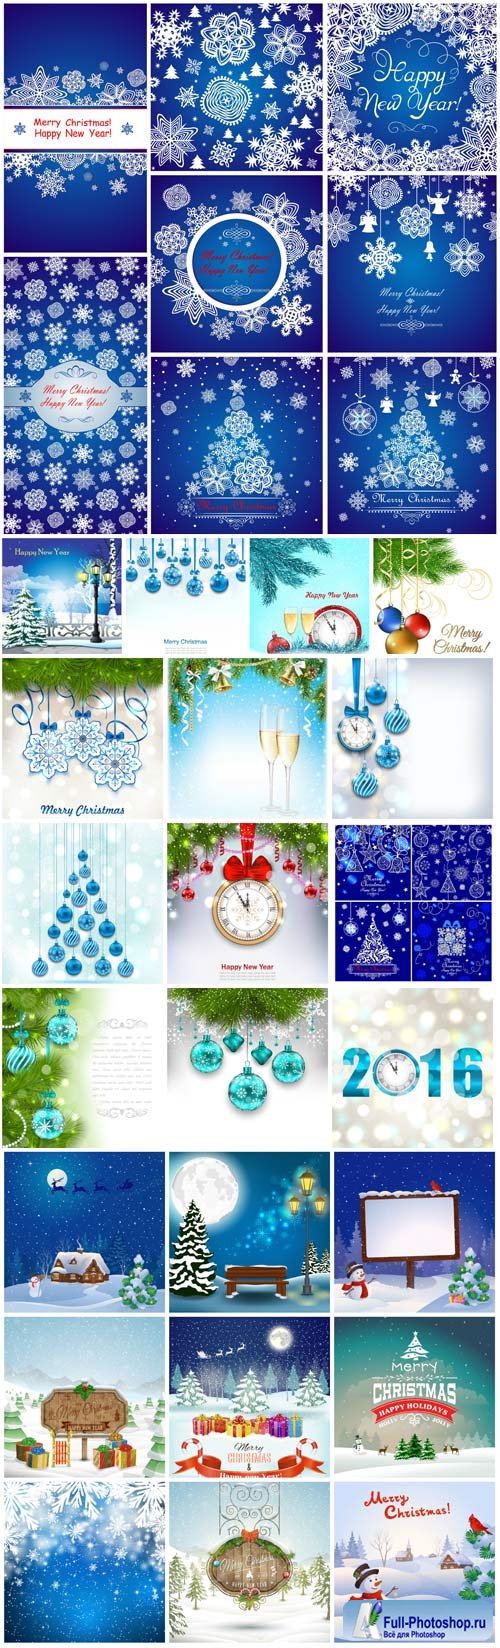 2016 Merry Christmas, New Year, holiday backgrounds vector